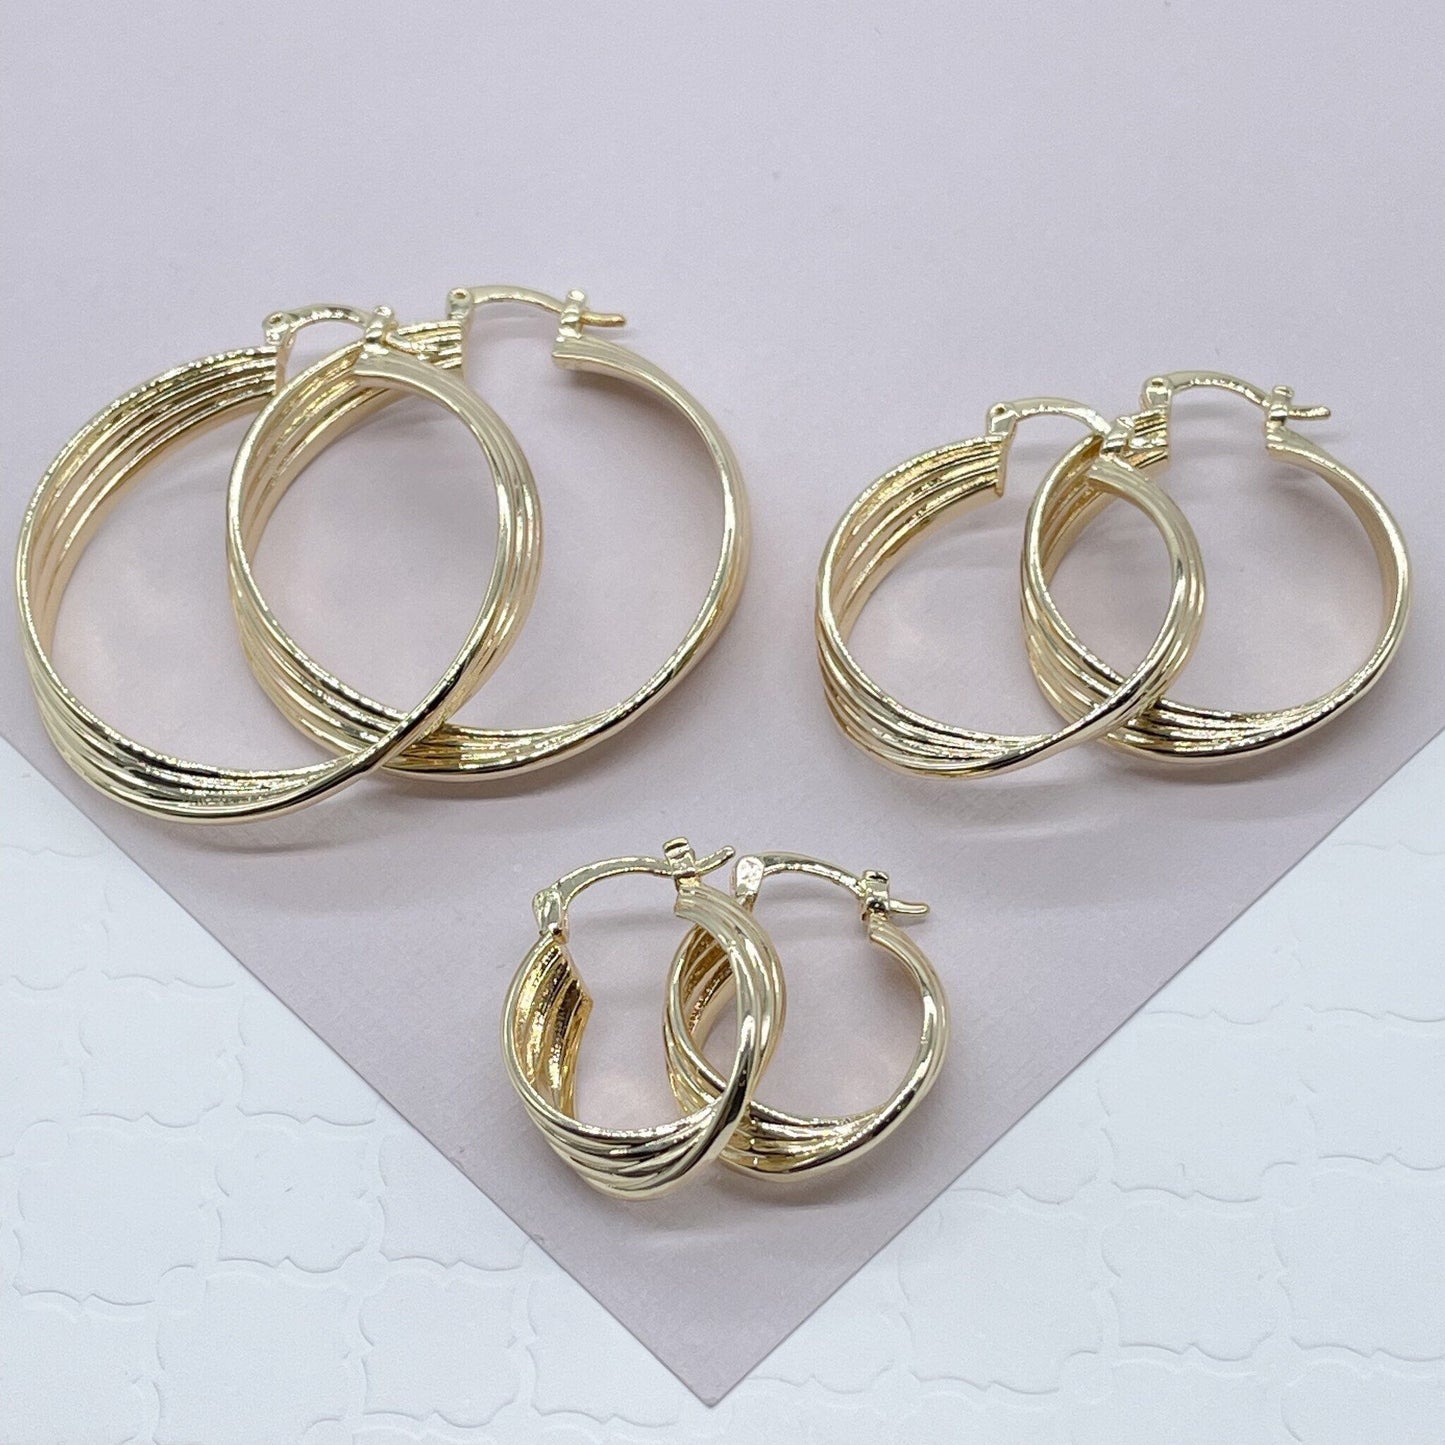 18k Gold Layered Four Layers Twisted 8mm Thick Hoop Earrings, Sizes 20mm, 30mm,